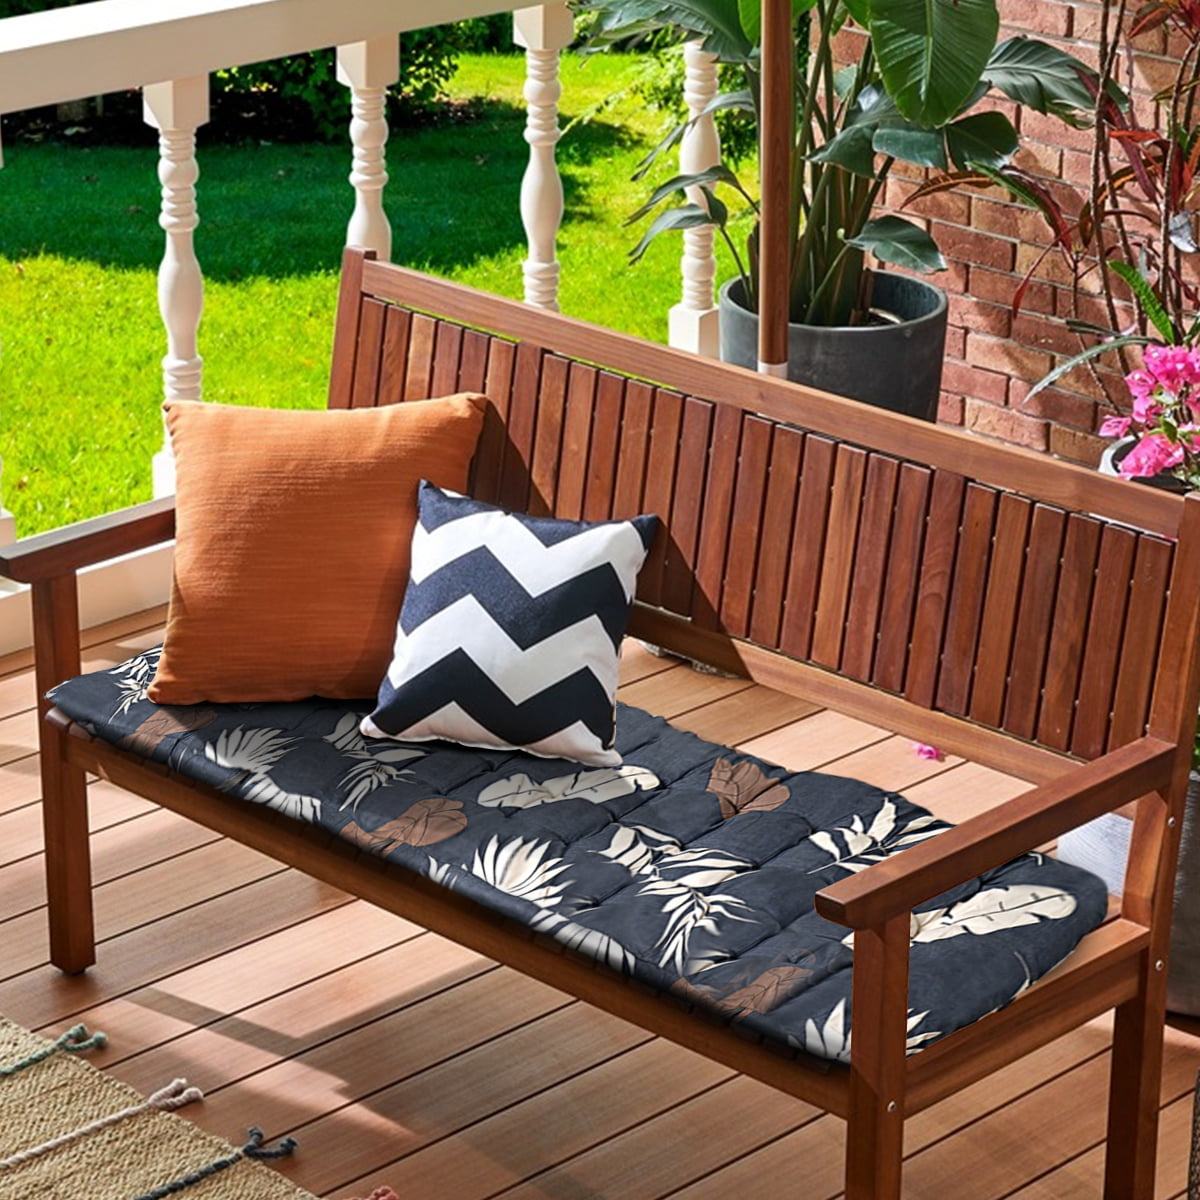 Details about   Bench Cushion Outdoor Patio Seat Pad Chair Seat Swing Mat Home Garden